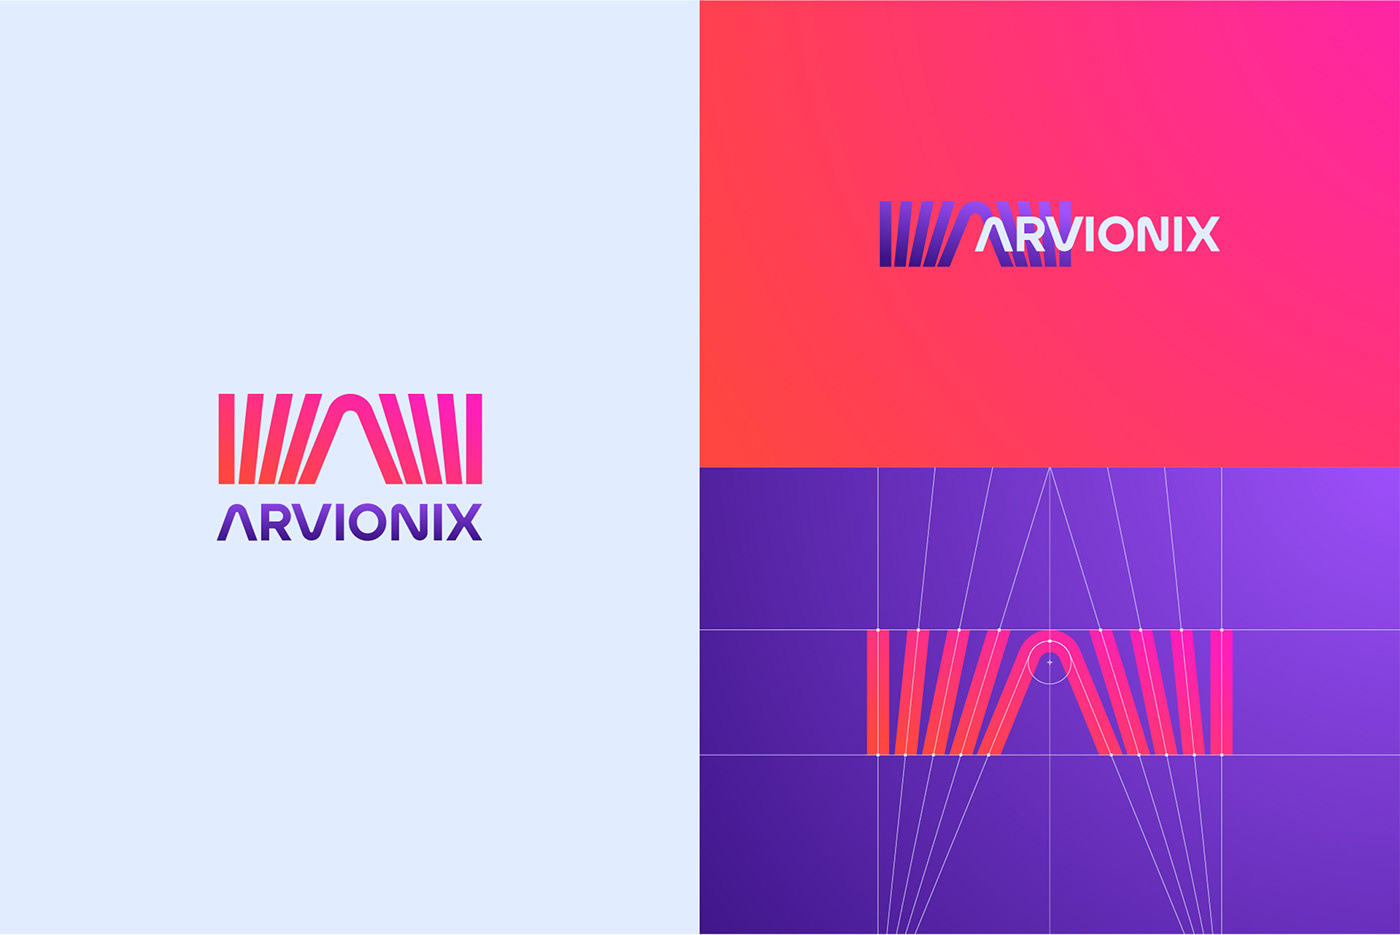 VR/AR logo construction and corporate colors